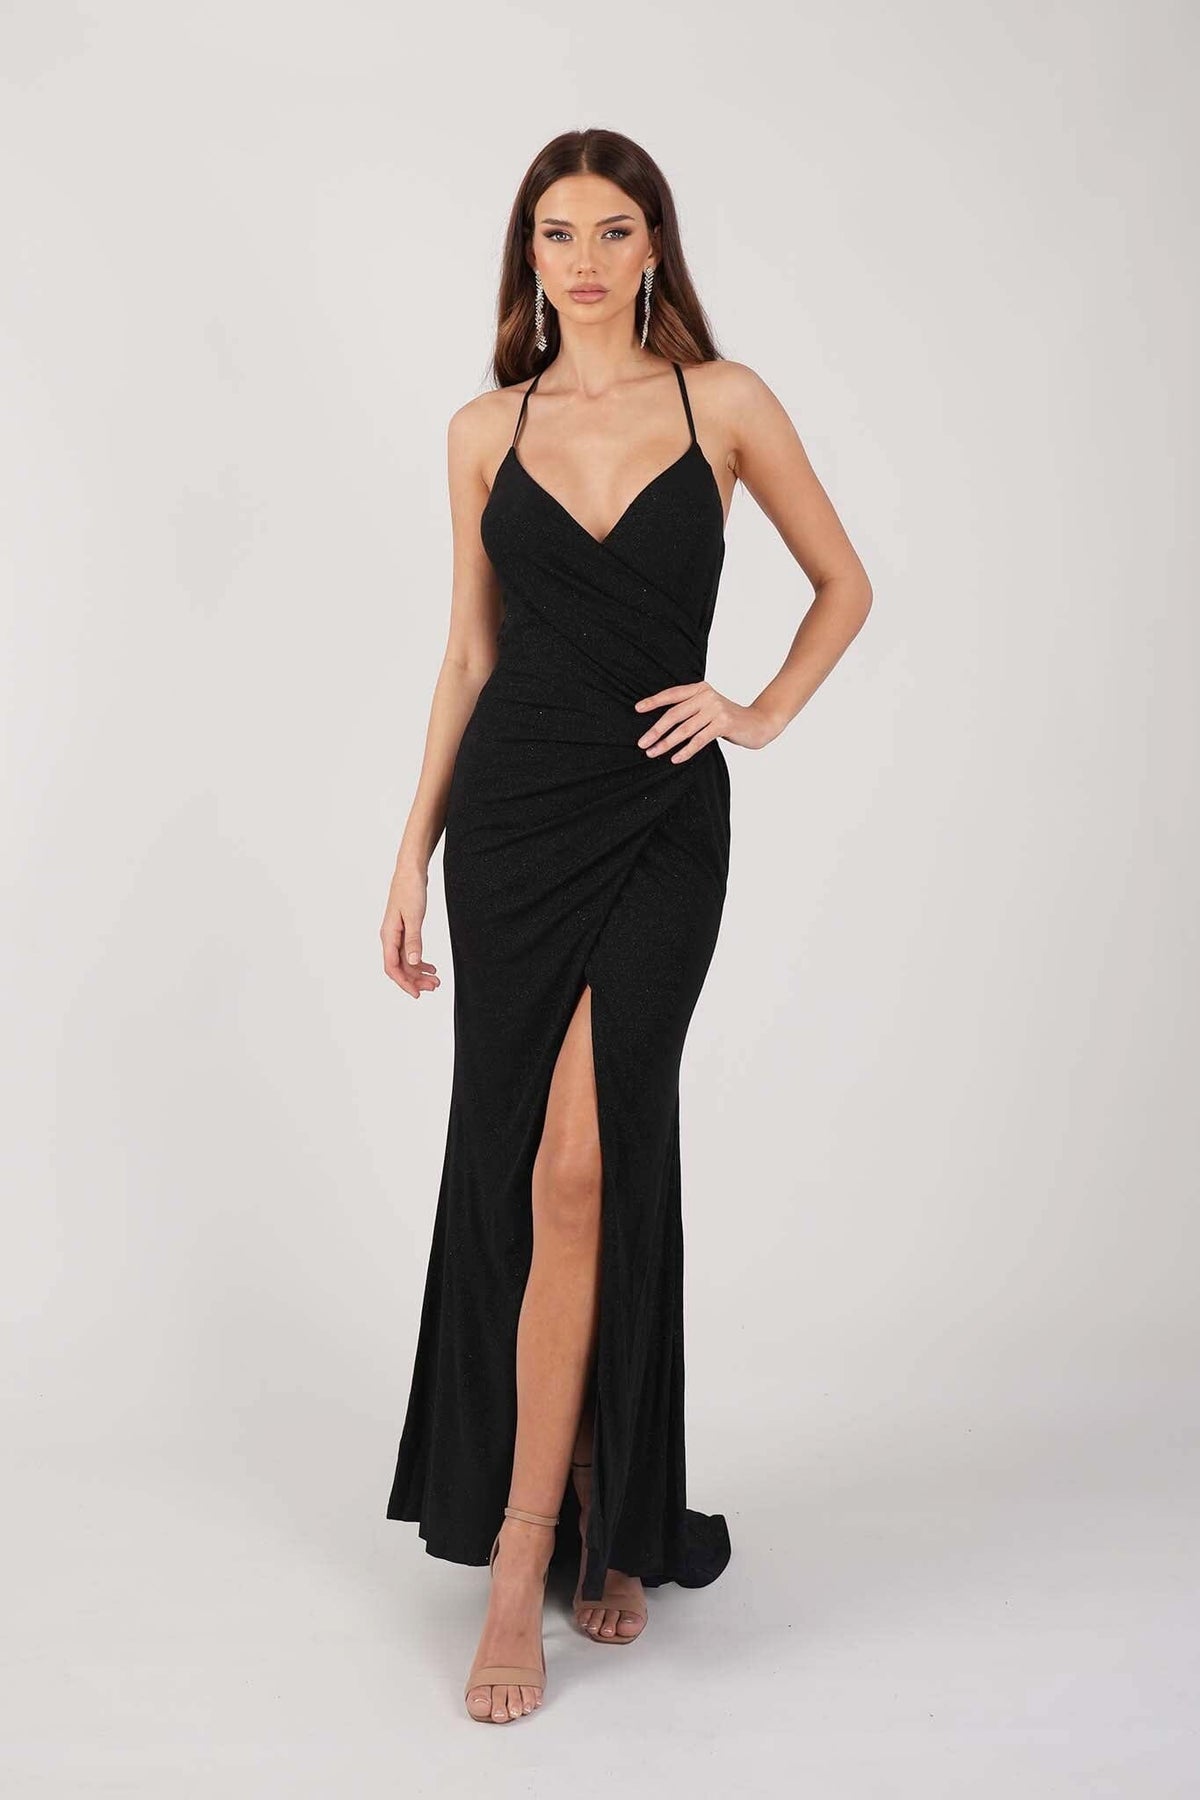 Black Shimmer Fitted Maxi Dress with Thin Shoulder Straps, Gathered Detail at Waist and Leg Slit